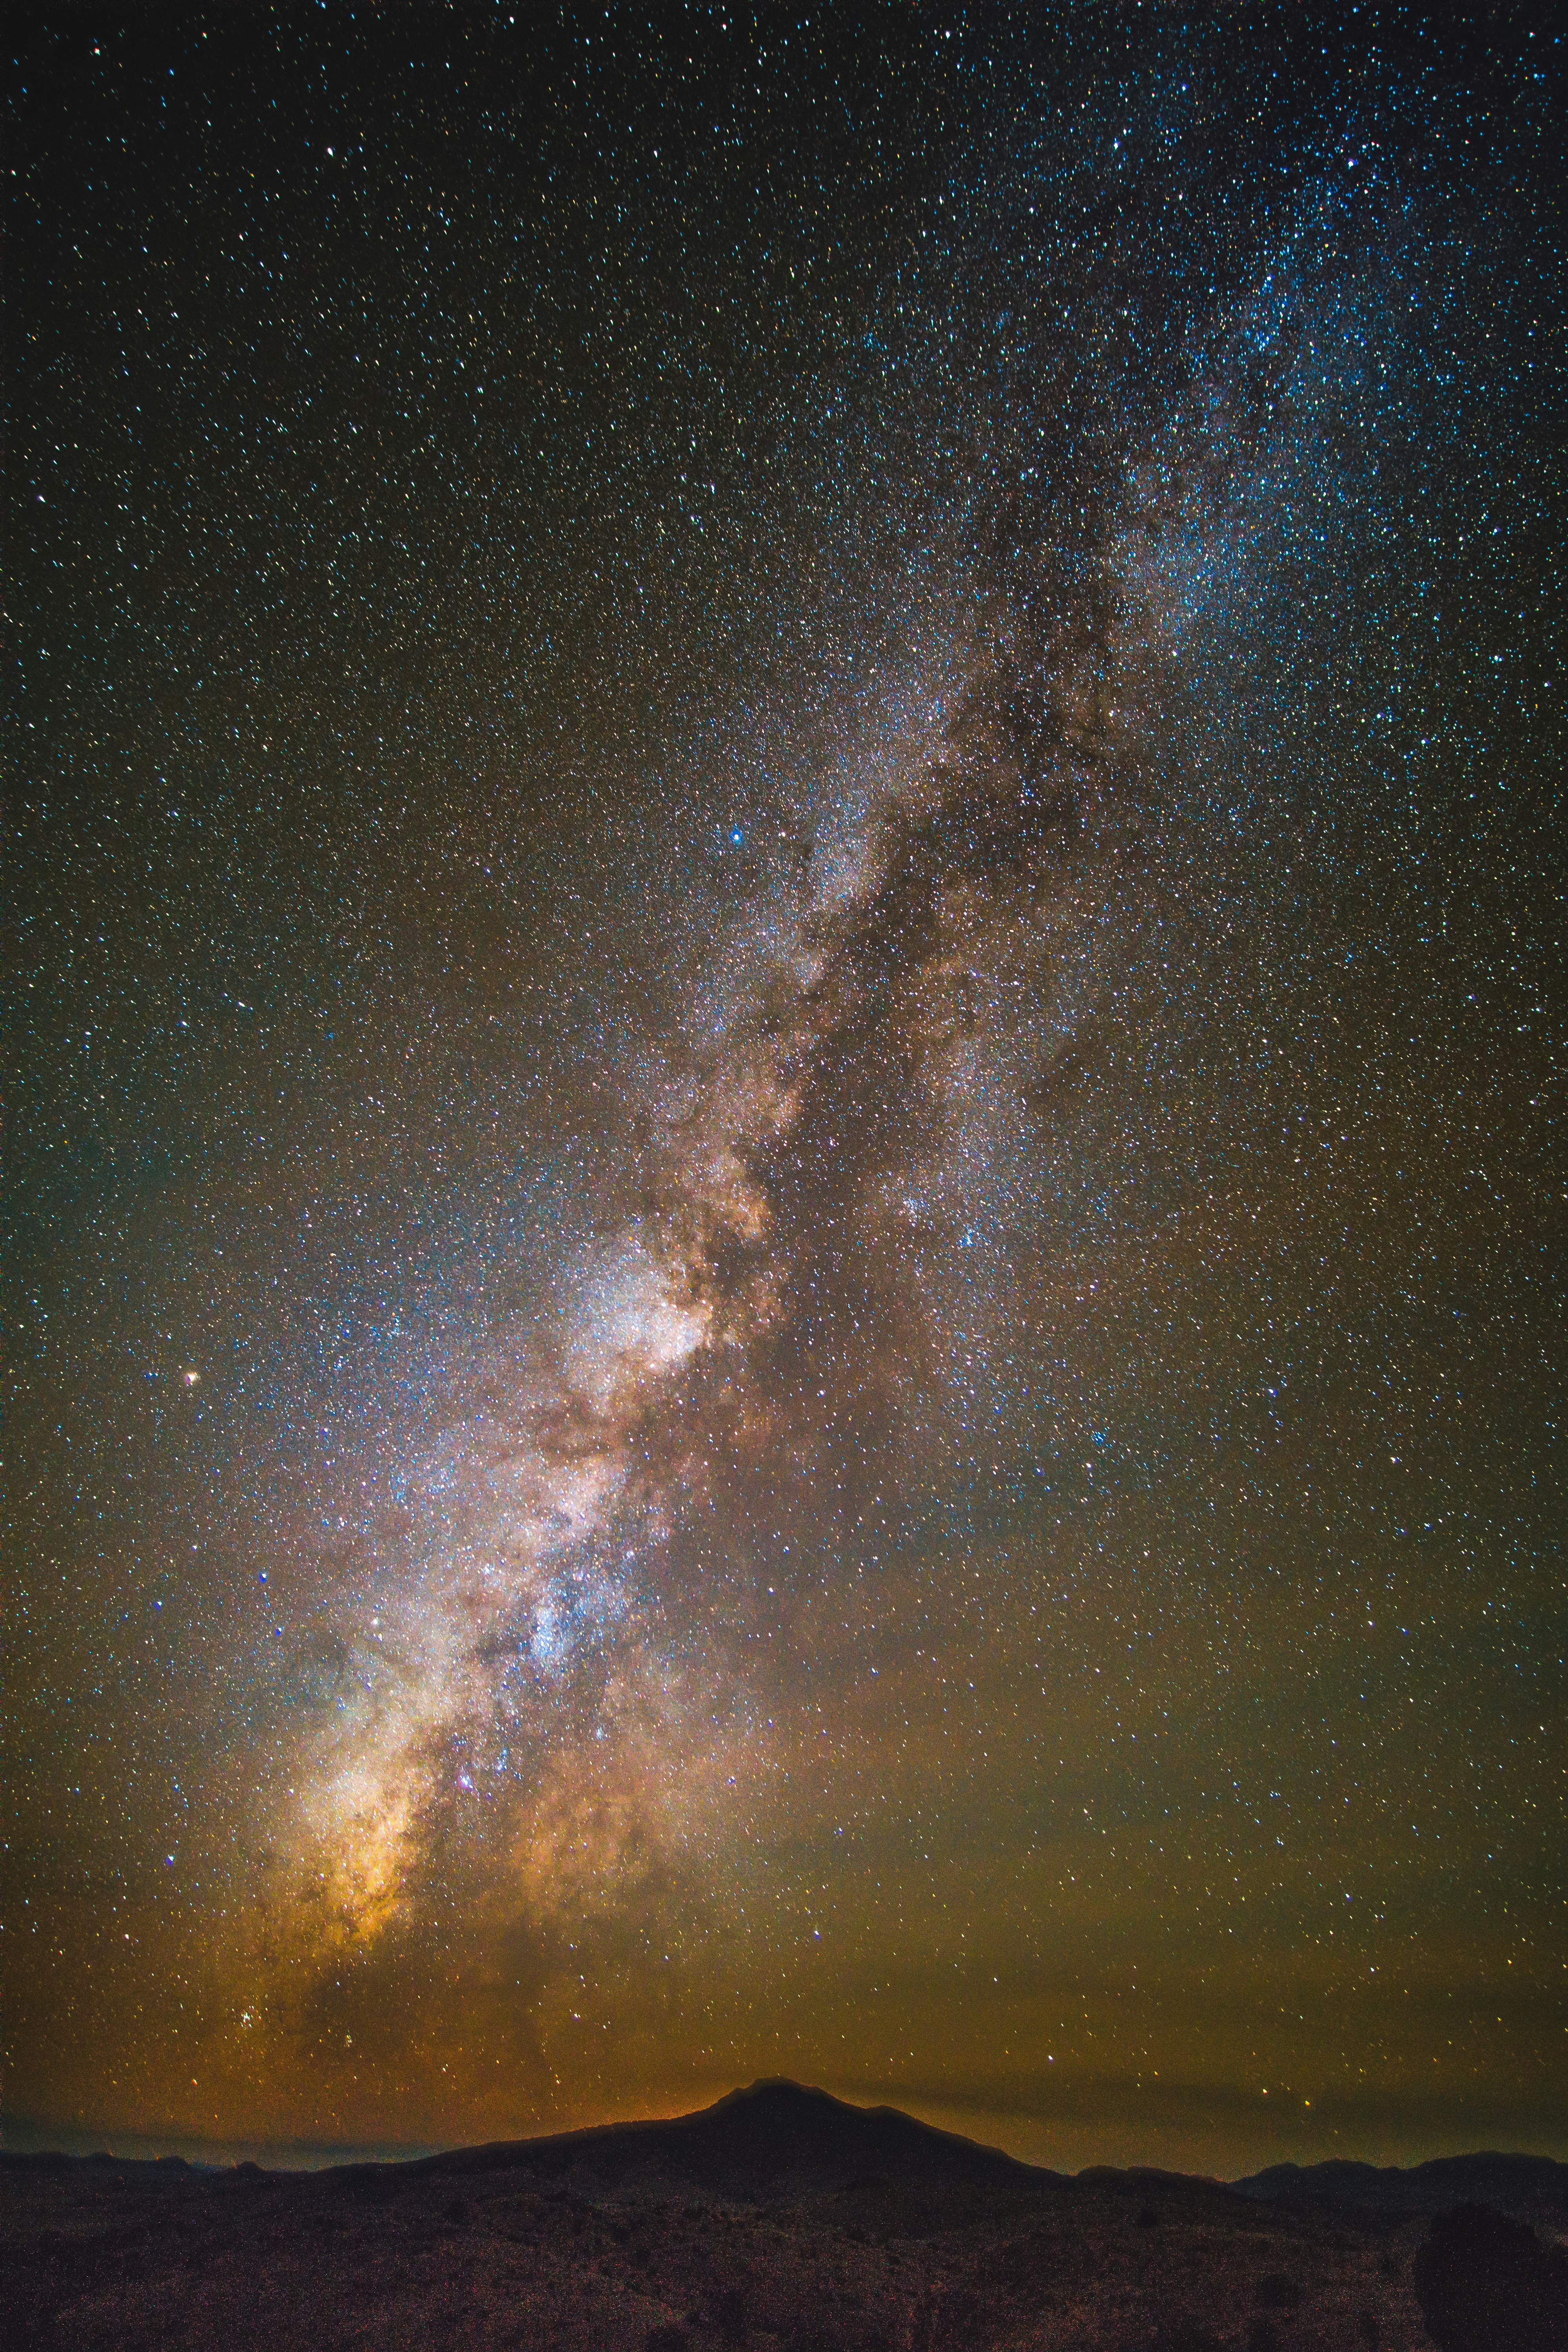 Alone on a mountain in far west Texas on the night of the new moon, long exposures reveal the hidden beauty of our galactic core.